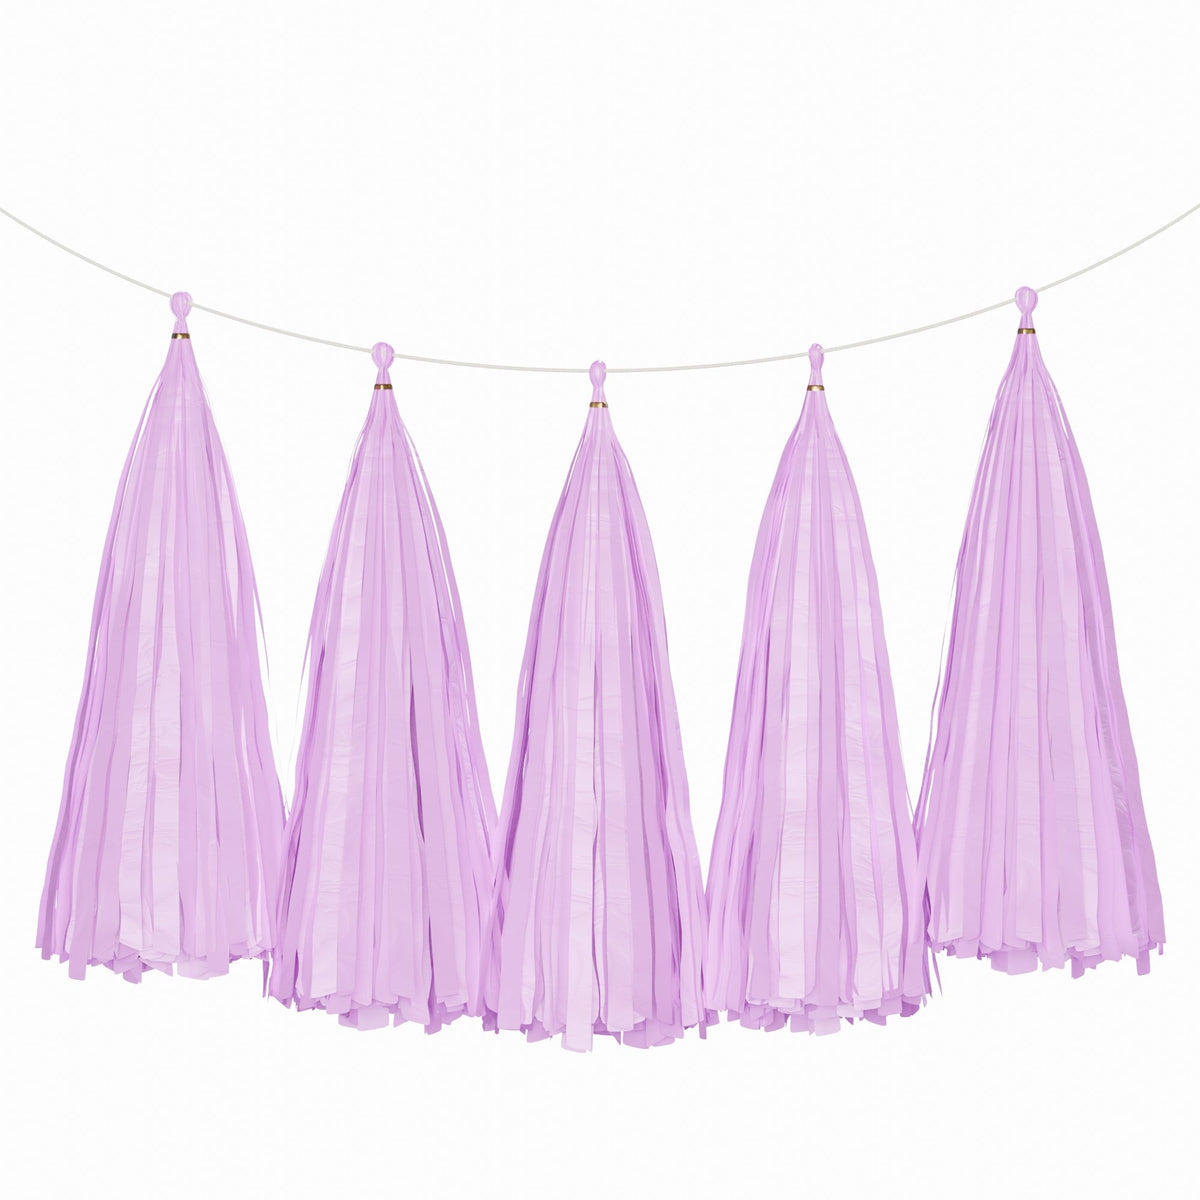 Weifang Mayshine Imp&exp co Decorations Lilac Tassel Garland, 5 Count 810064197109